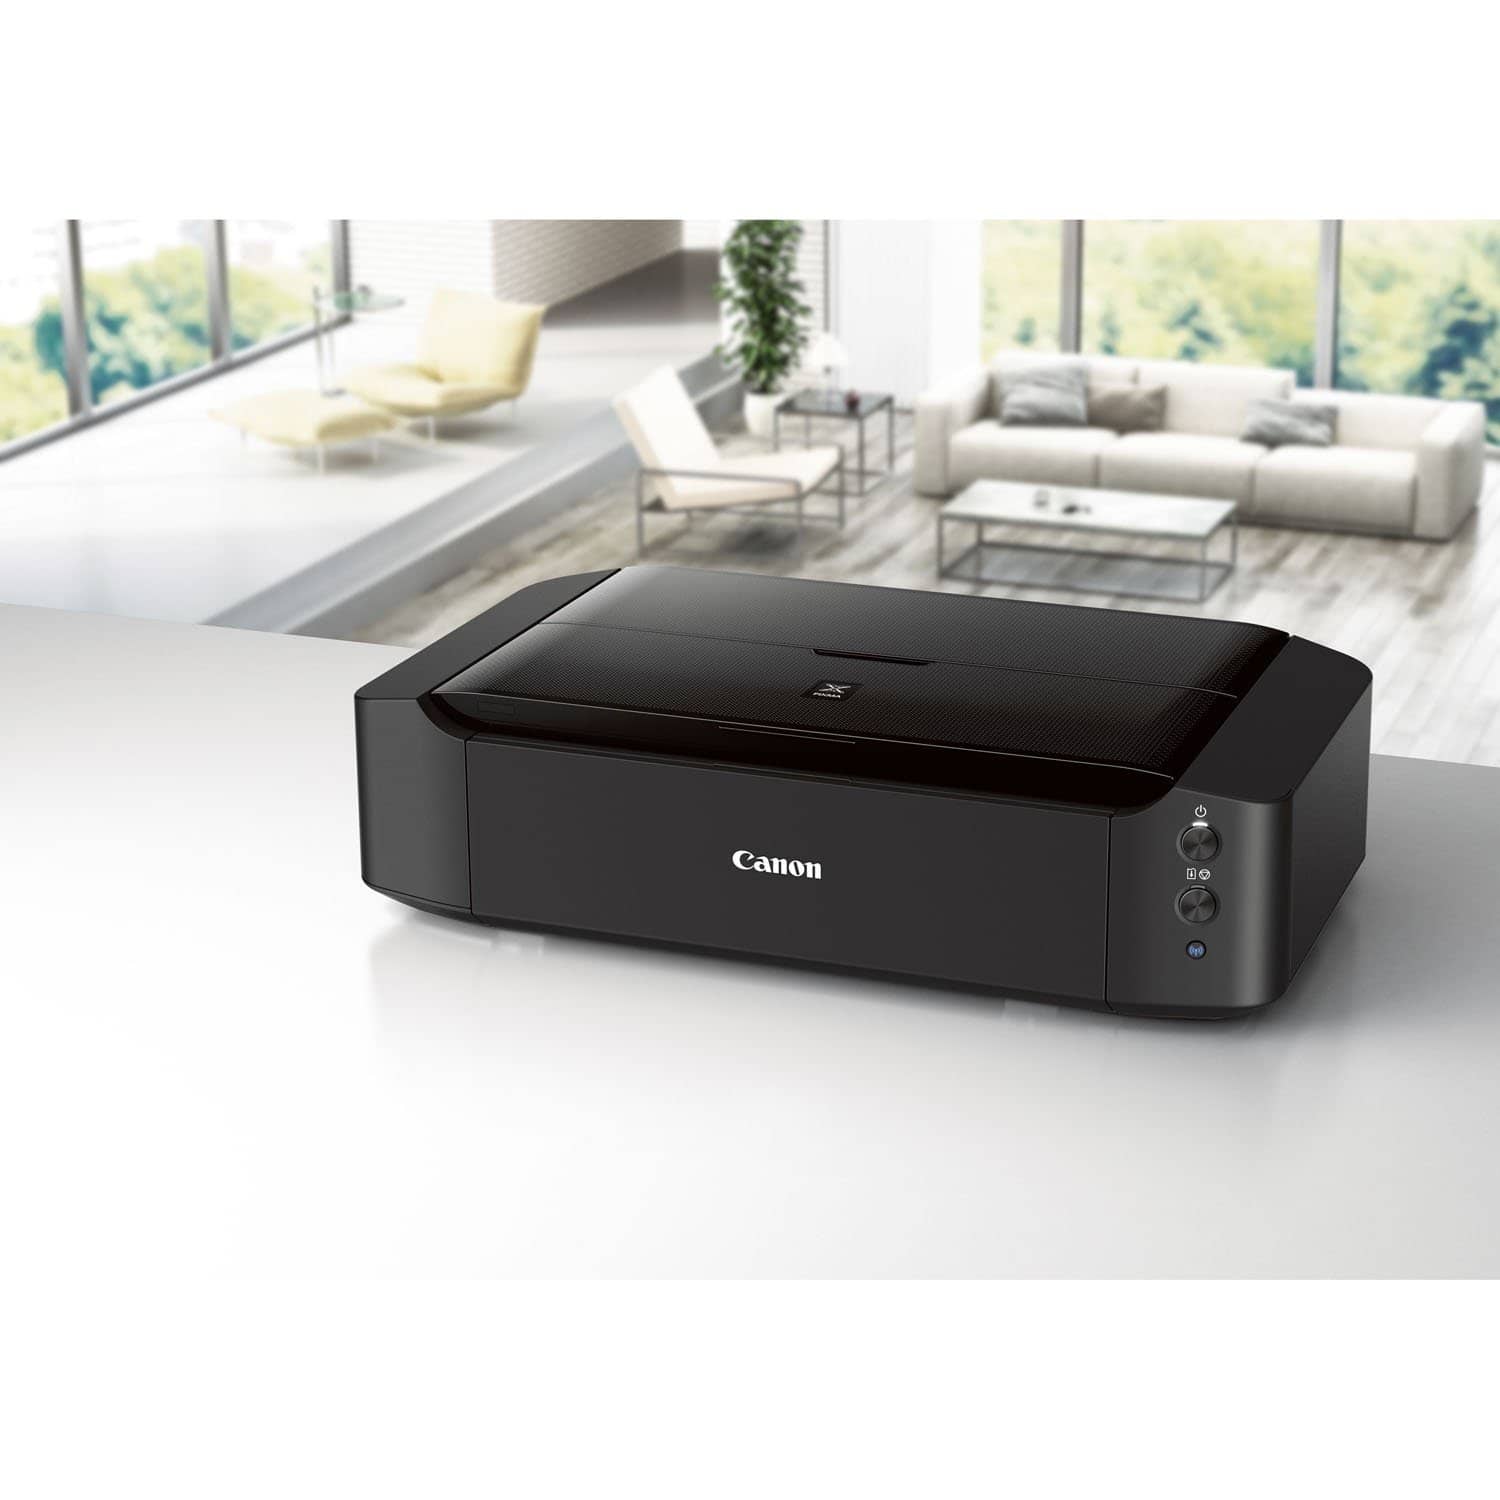 Canon iP8720 Wireless Printer, AirPrint and Cloud Compatible